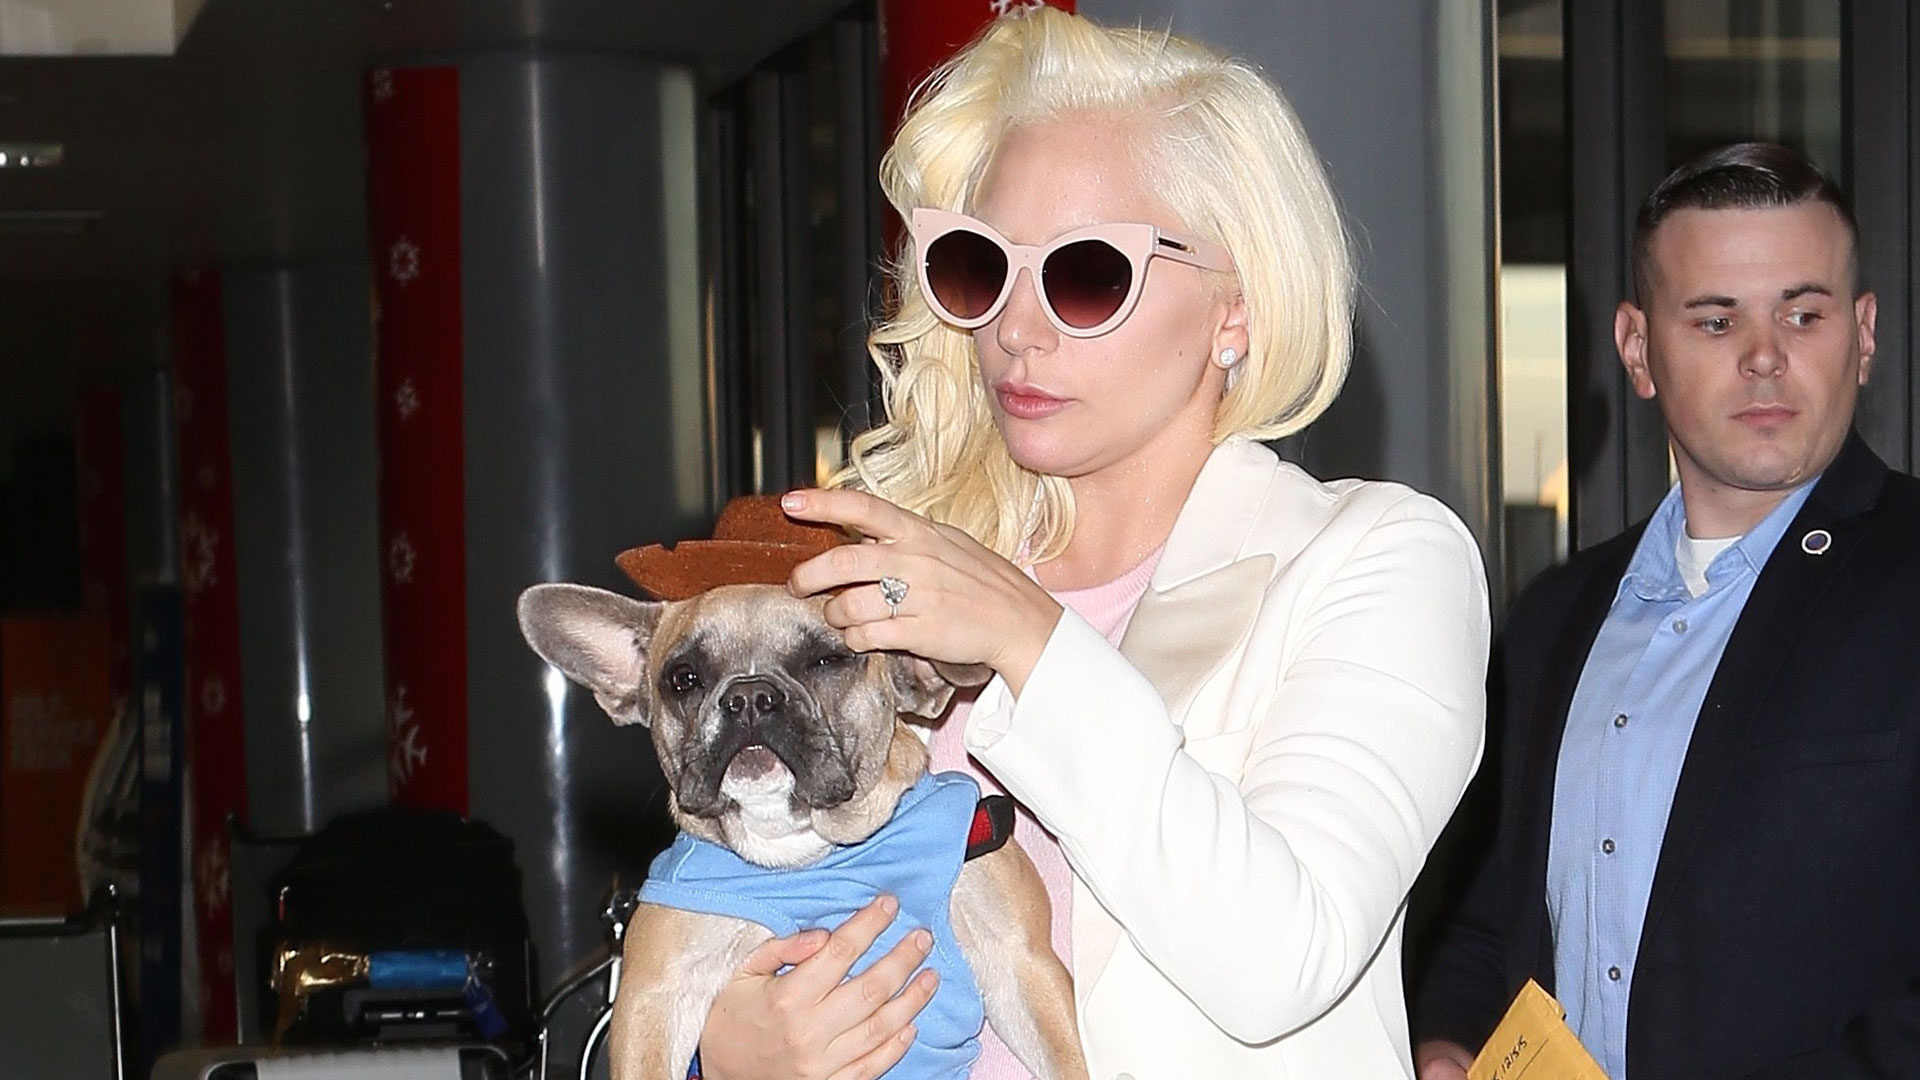 Lady Gaga leaves Los Angeles with one of her dogs.  Photo © 2015 X17/The Grosby Group